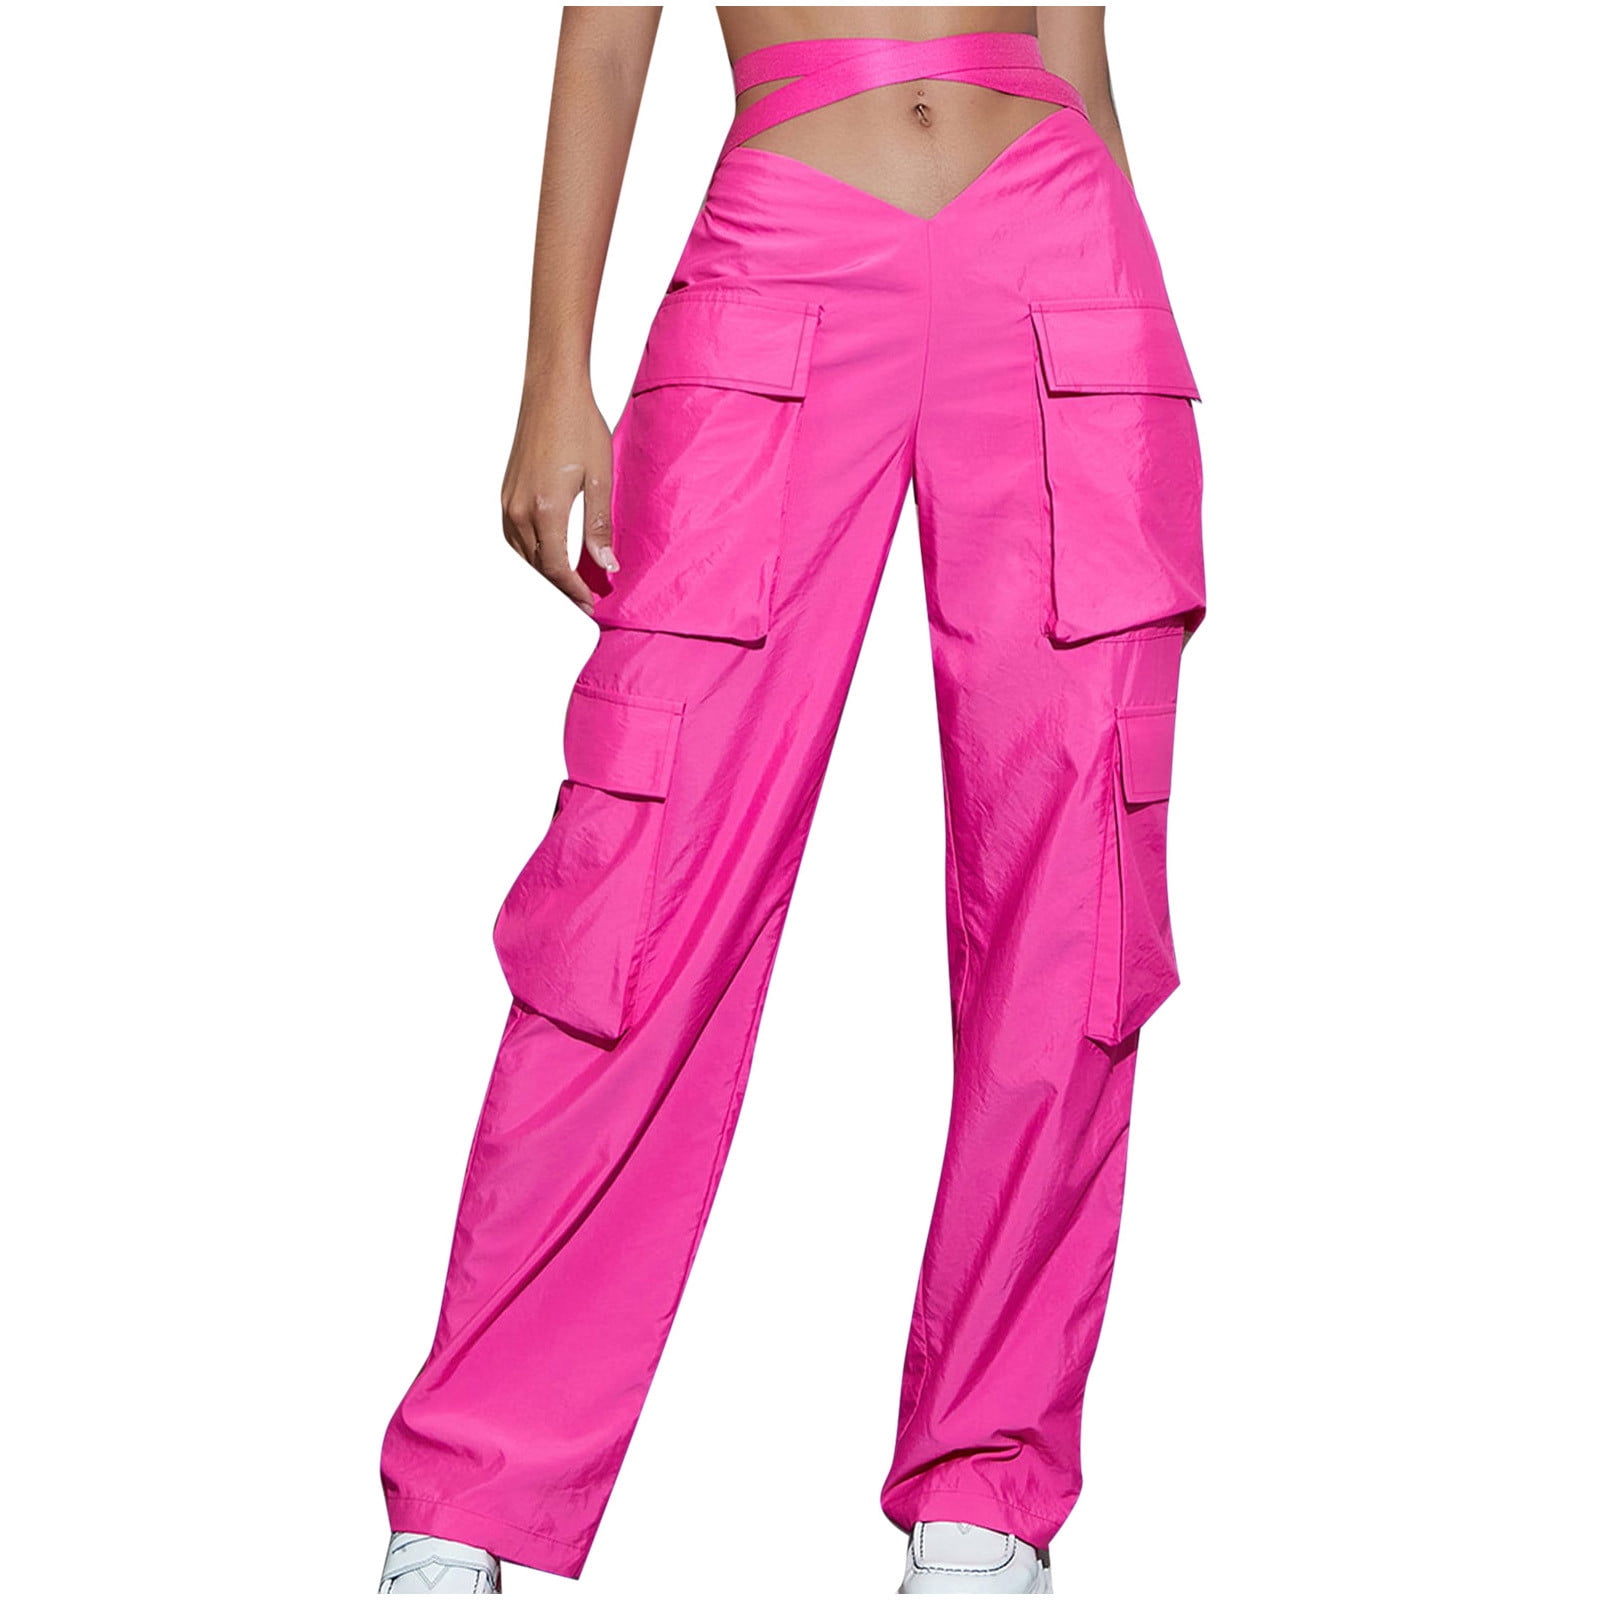 Airpow Clearance Cargo Pants Women's Street Style Fashion Design